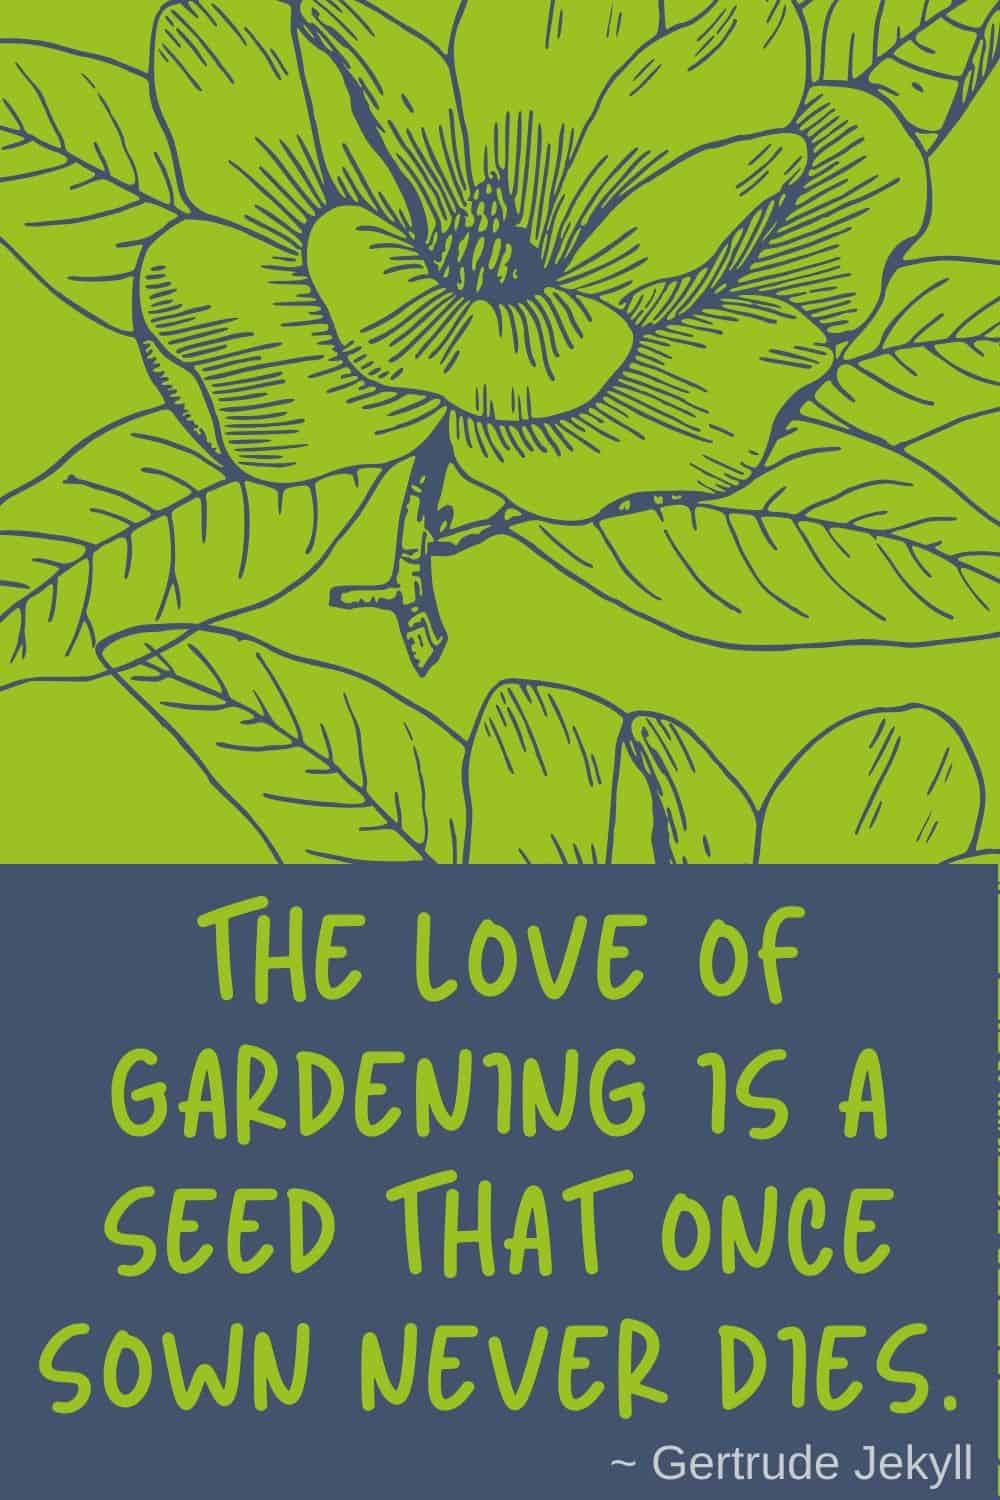 The love of gardening is a seed that once sown never dies